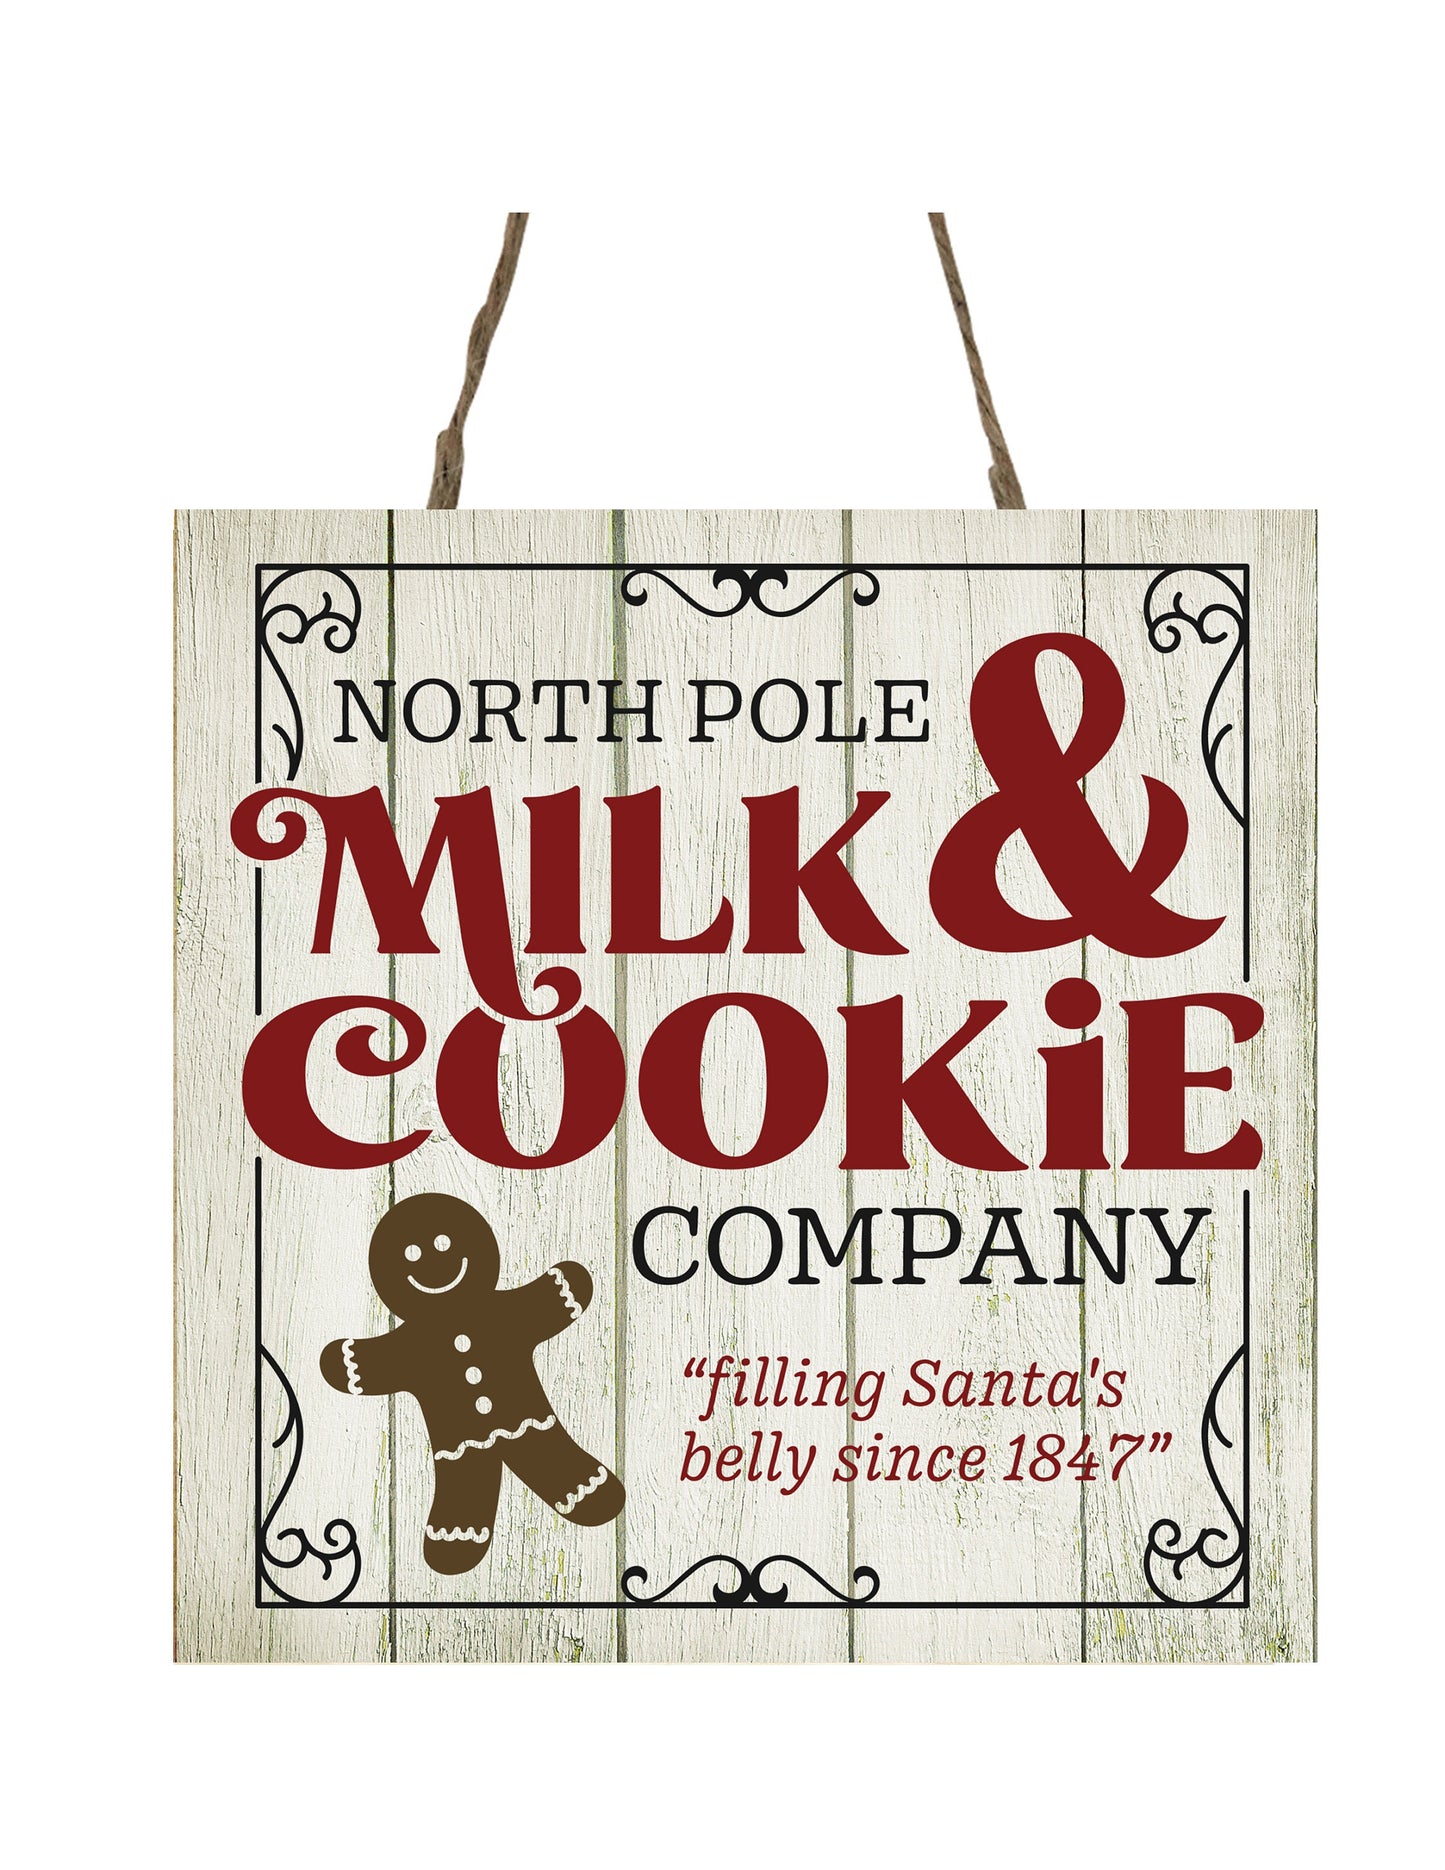 North Pole Milk and Cookie Co Printed Handmade Wood Christmas Ornament Mini Sign